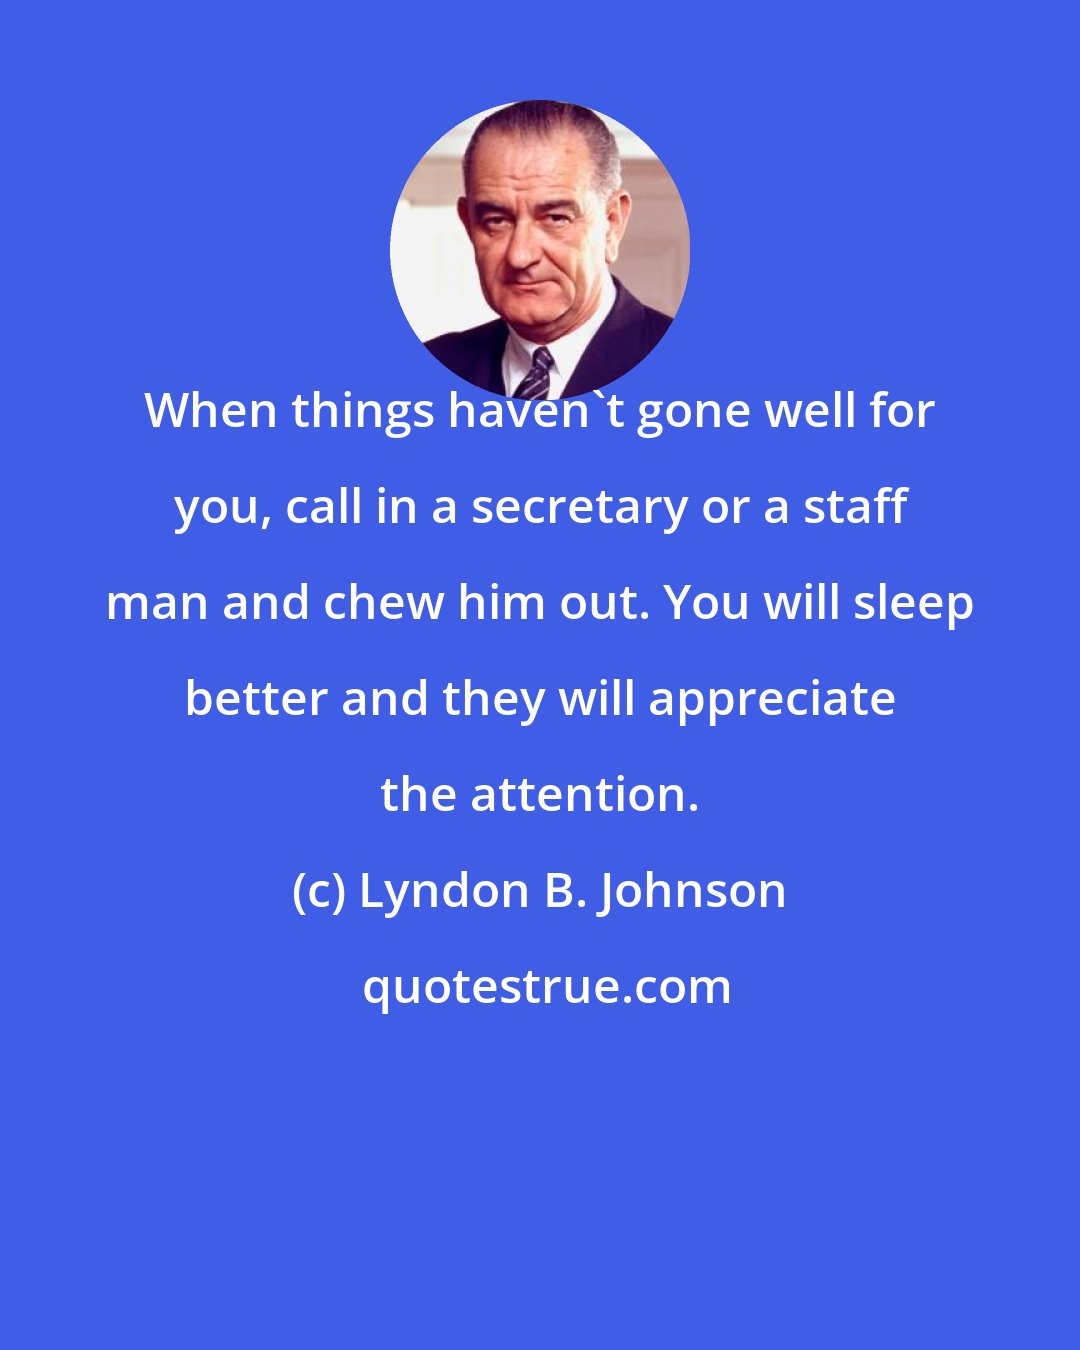 Lyndon B. Johnson: When things haven't gone well for you, call in a secretary or a staff man and chew him out. You will sleep better and they will appreciate the attention.